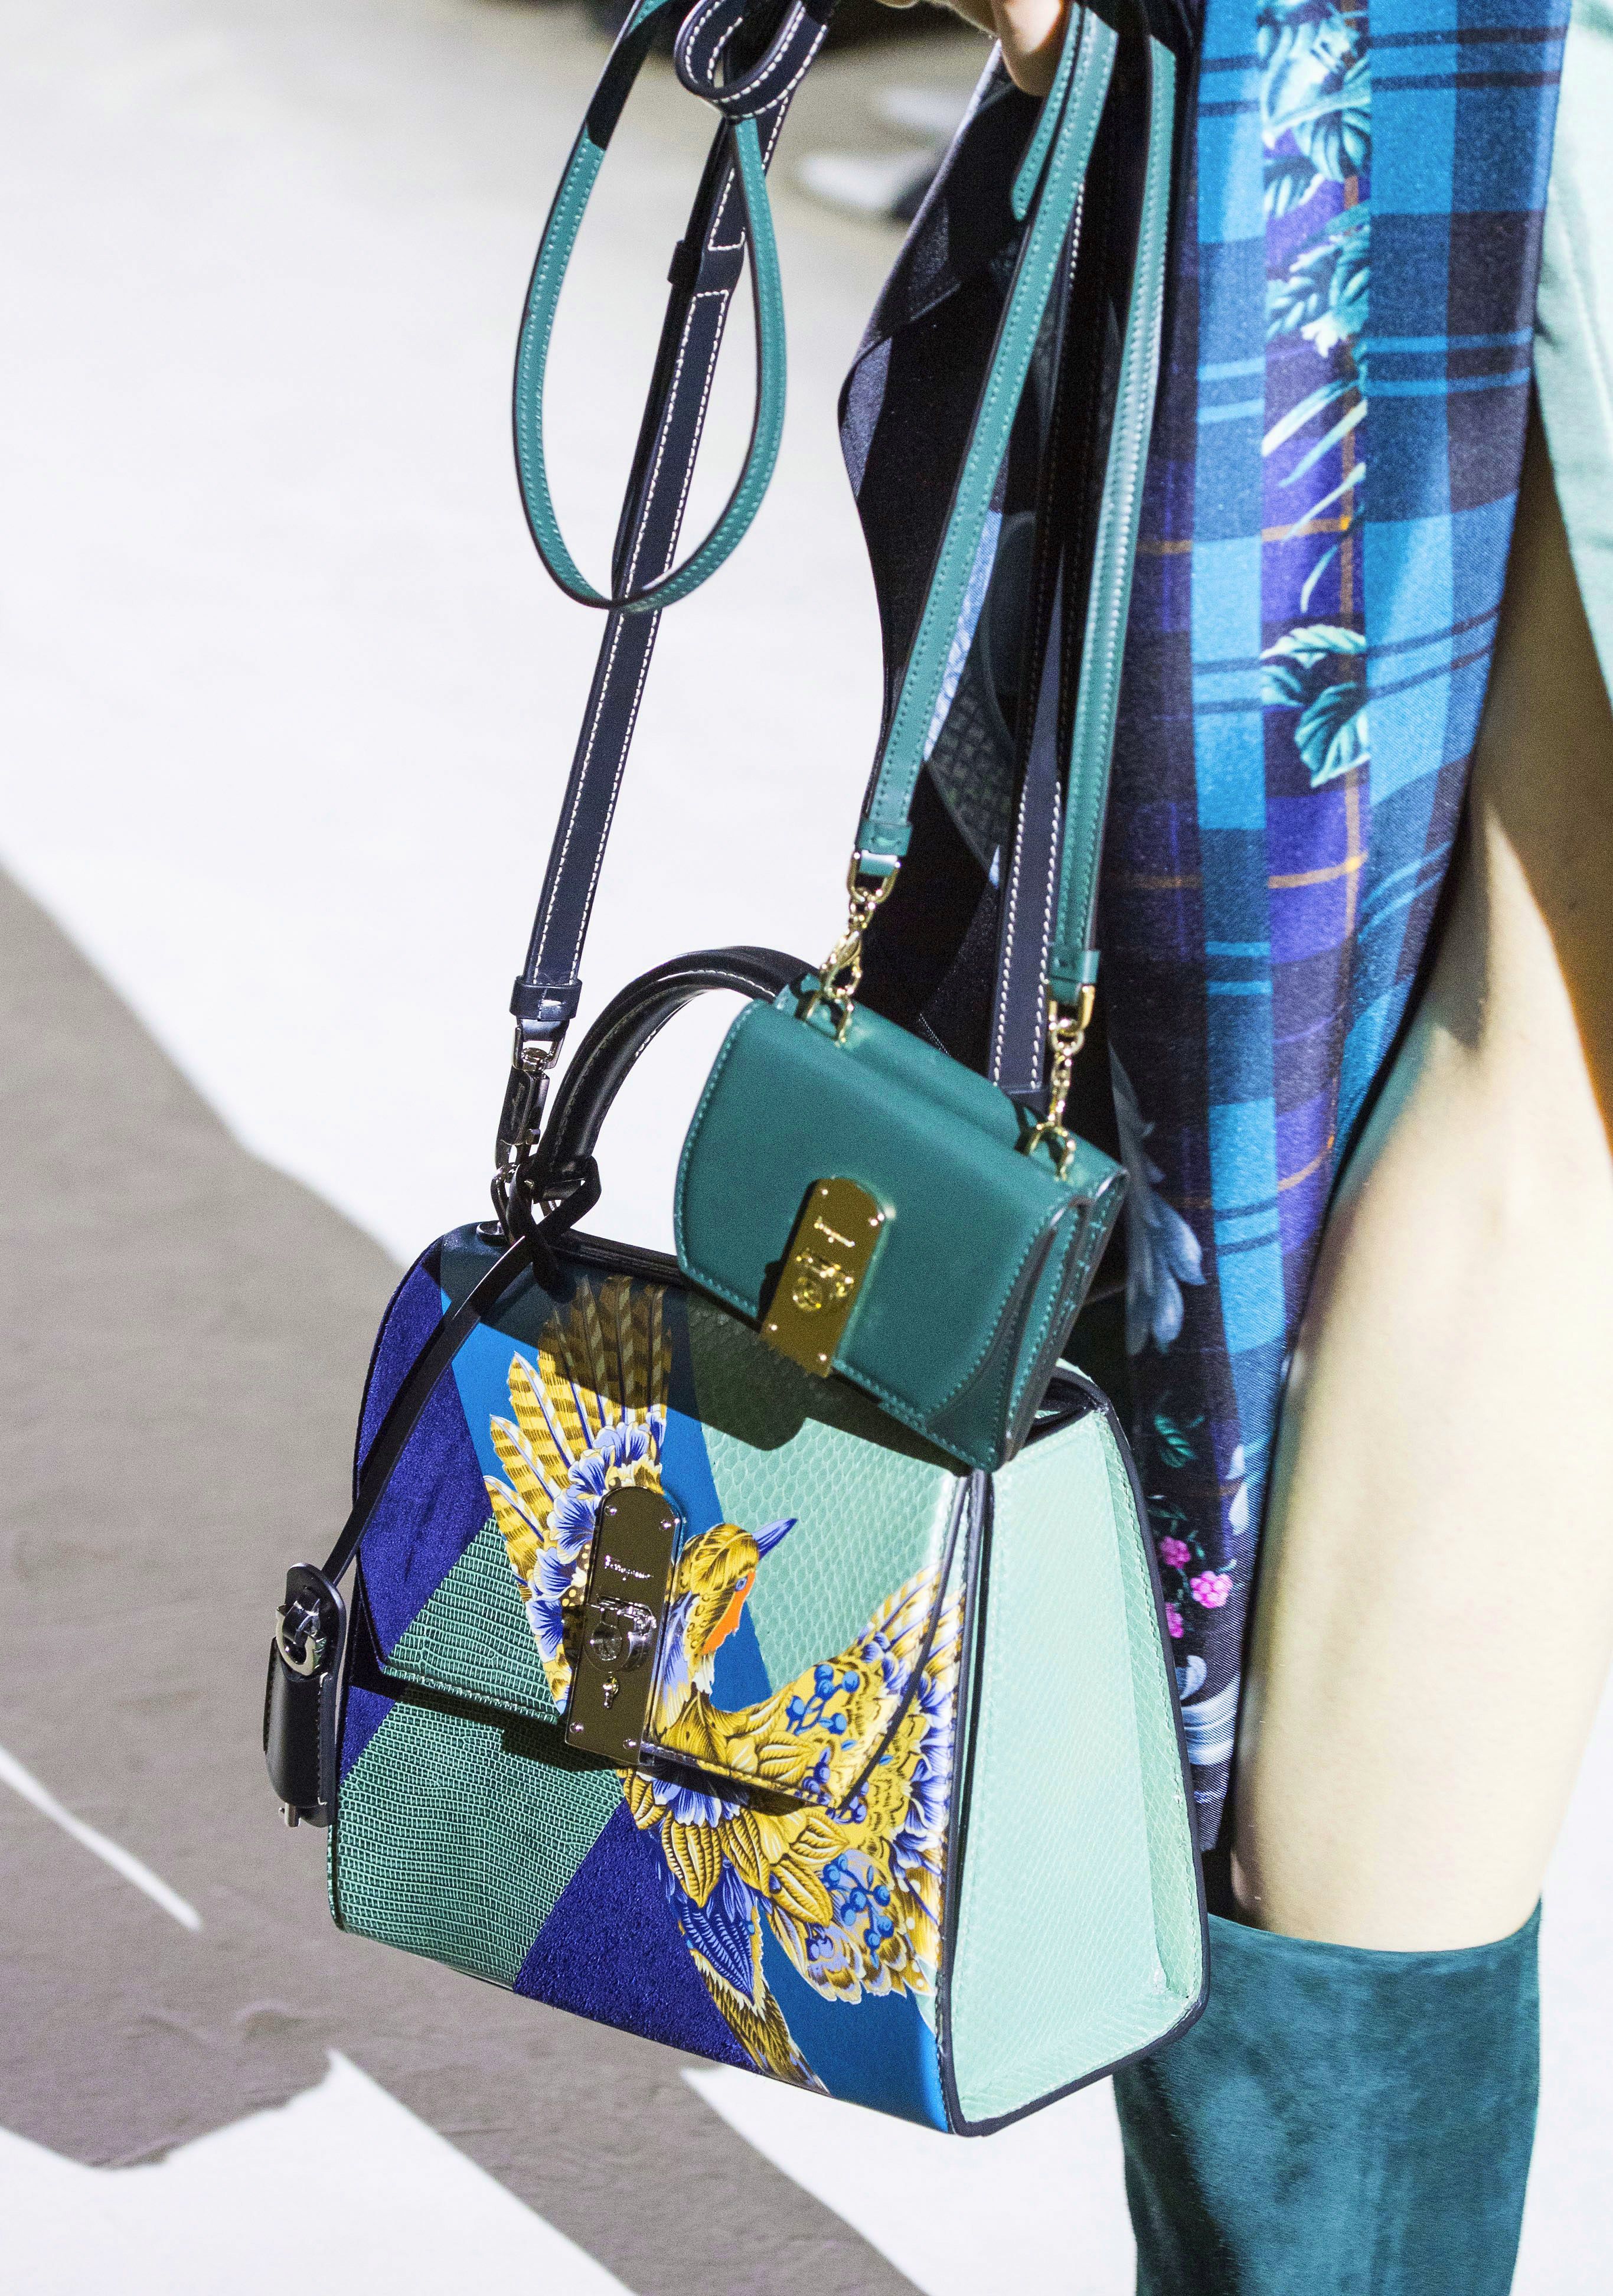 Salvatore Ferragamo boxyz printed bag from the Fall 2019 Runway Bag Collection